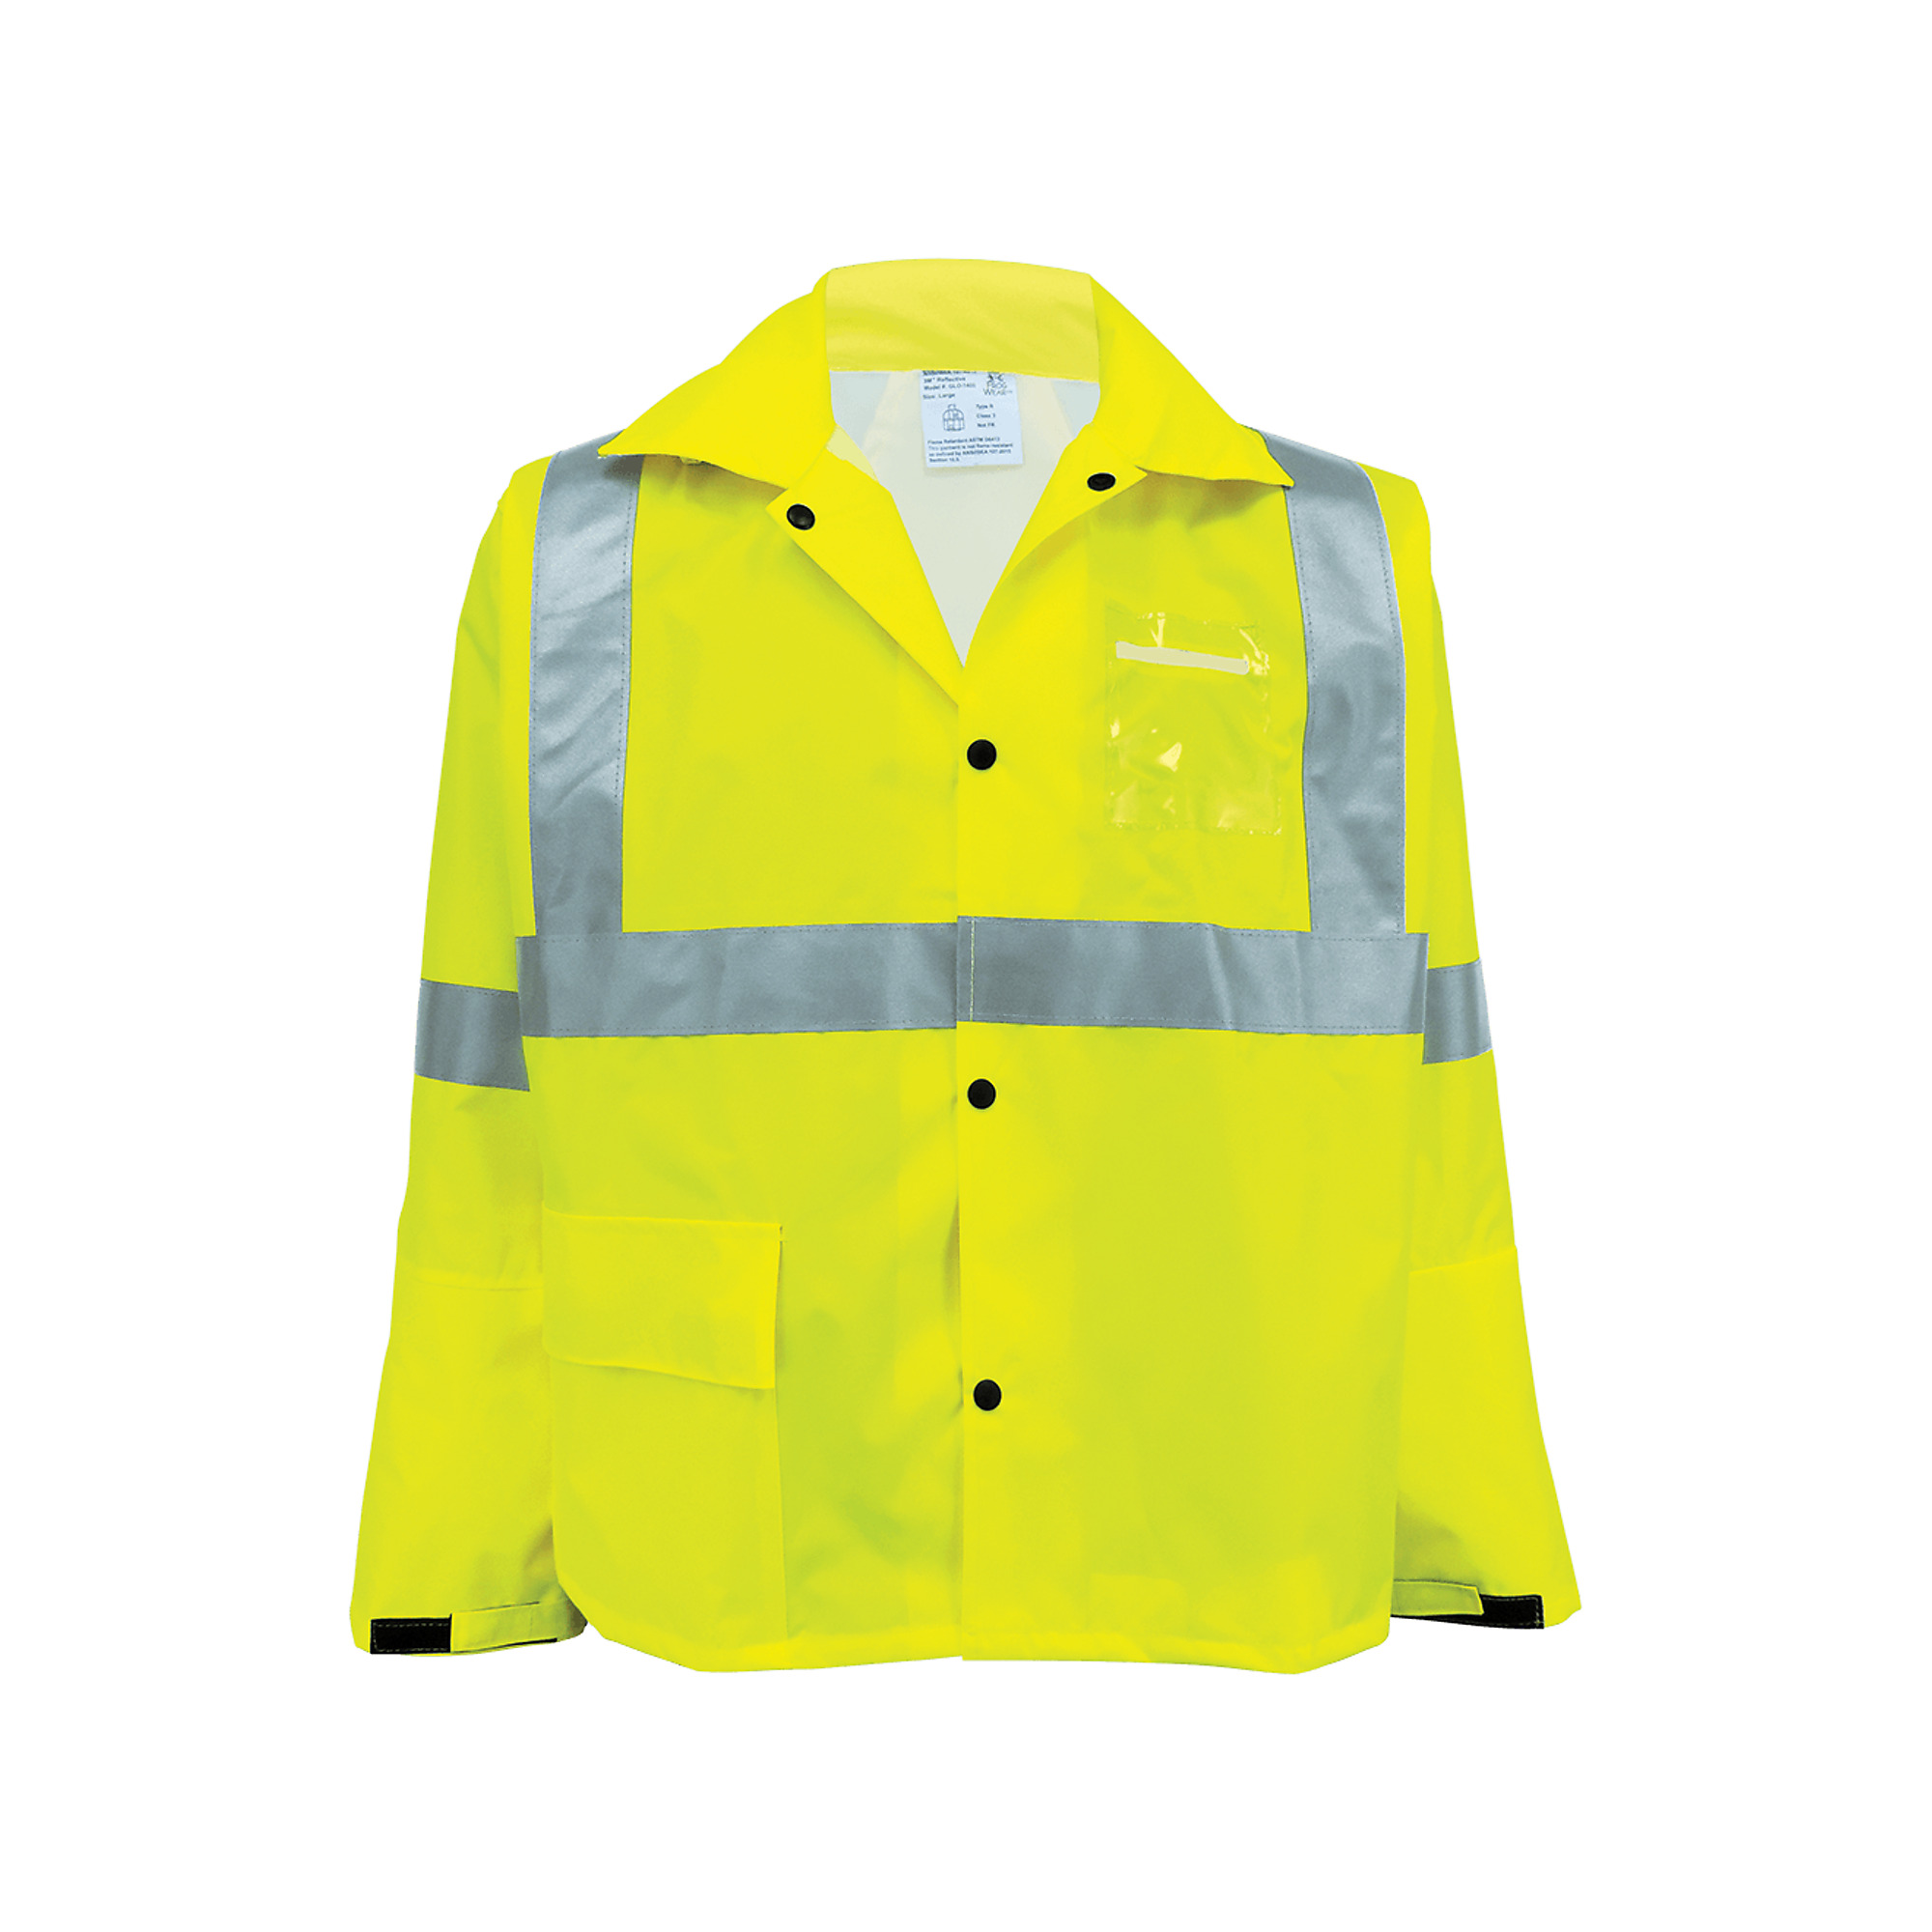 FrogWear, HV Yel/Grn, Class 3 Self-Extinguish, 1 Pocket, Rain Jacket, Size S, Color High-Visibility Yellow/Green, Model GLO-1400-S